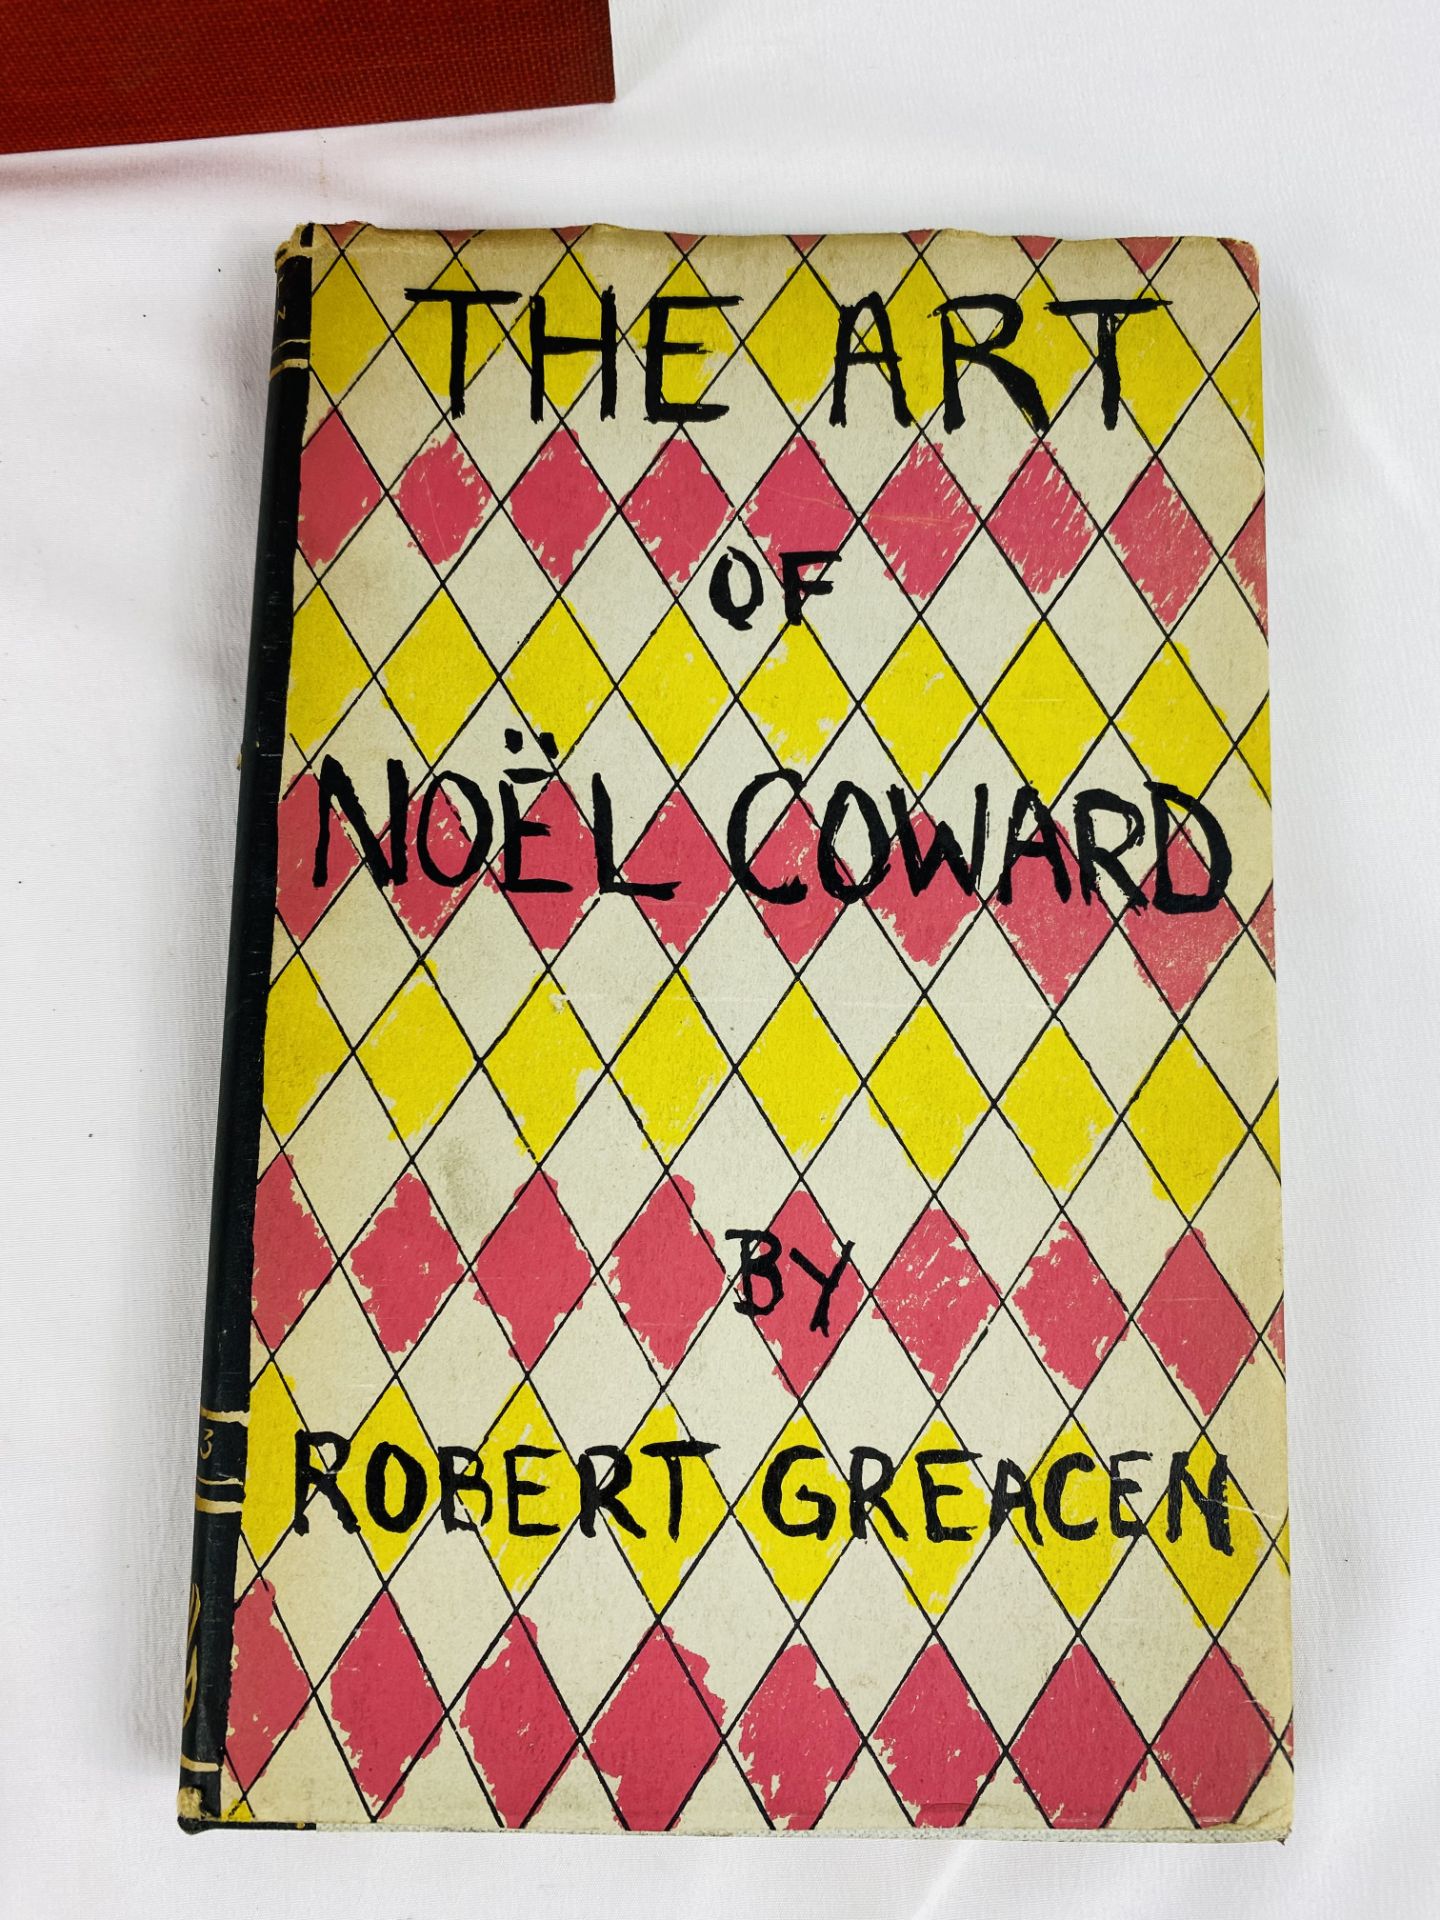 Noel Coward, Quadrille, together with two copies of The Art of Noel Coward by Robert Greacen - Image 3 of 6